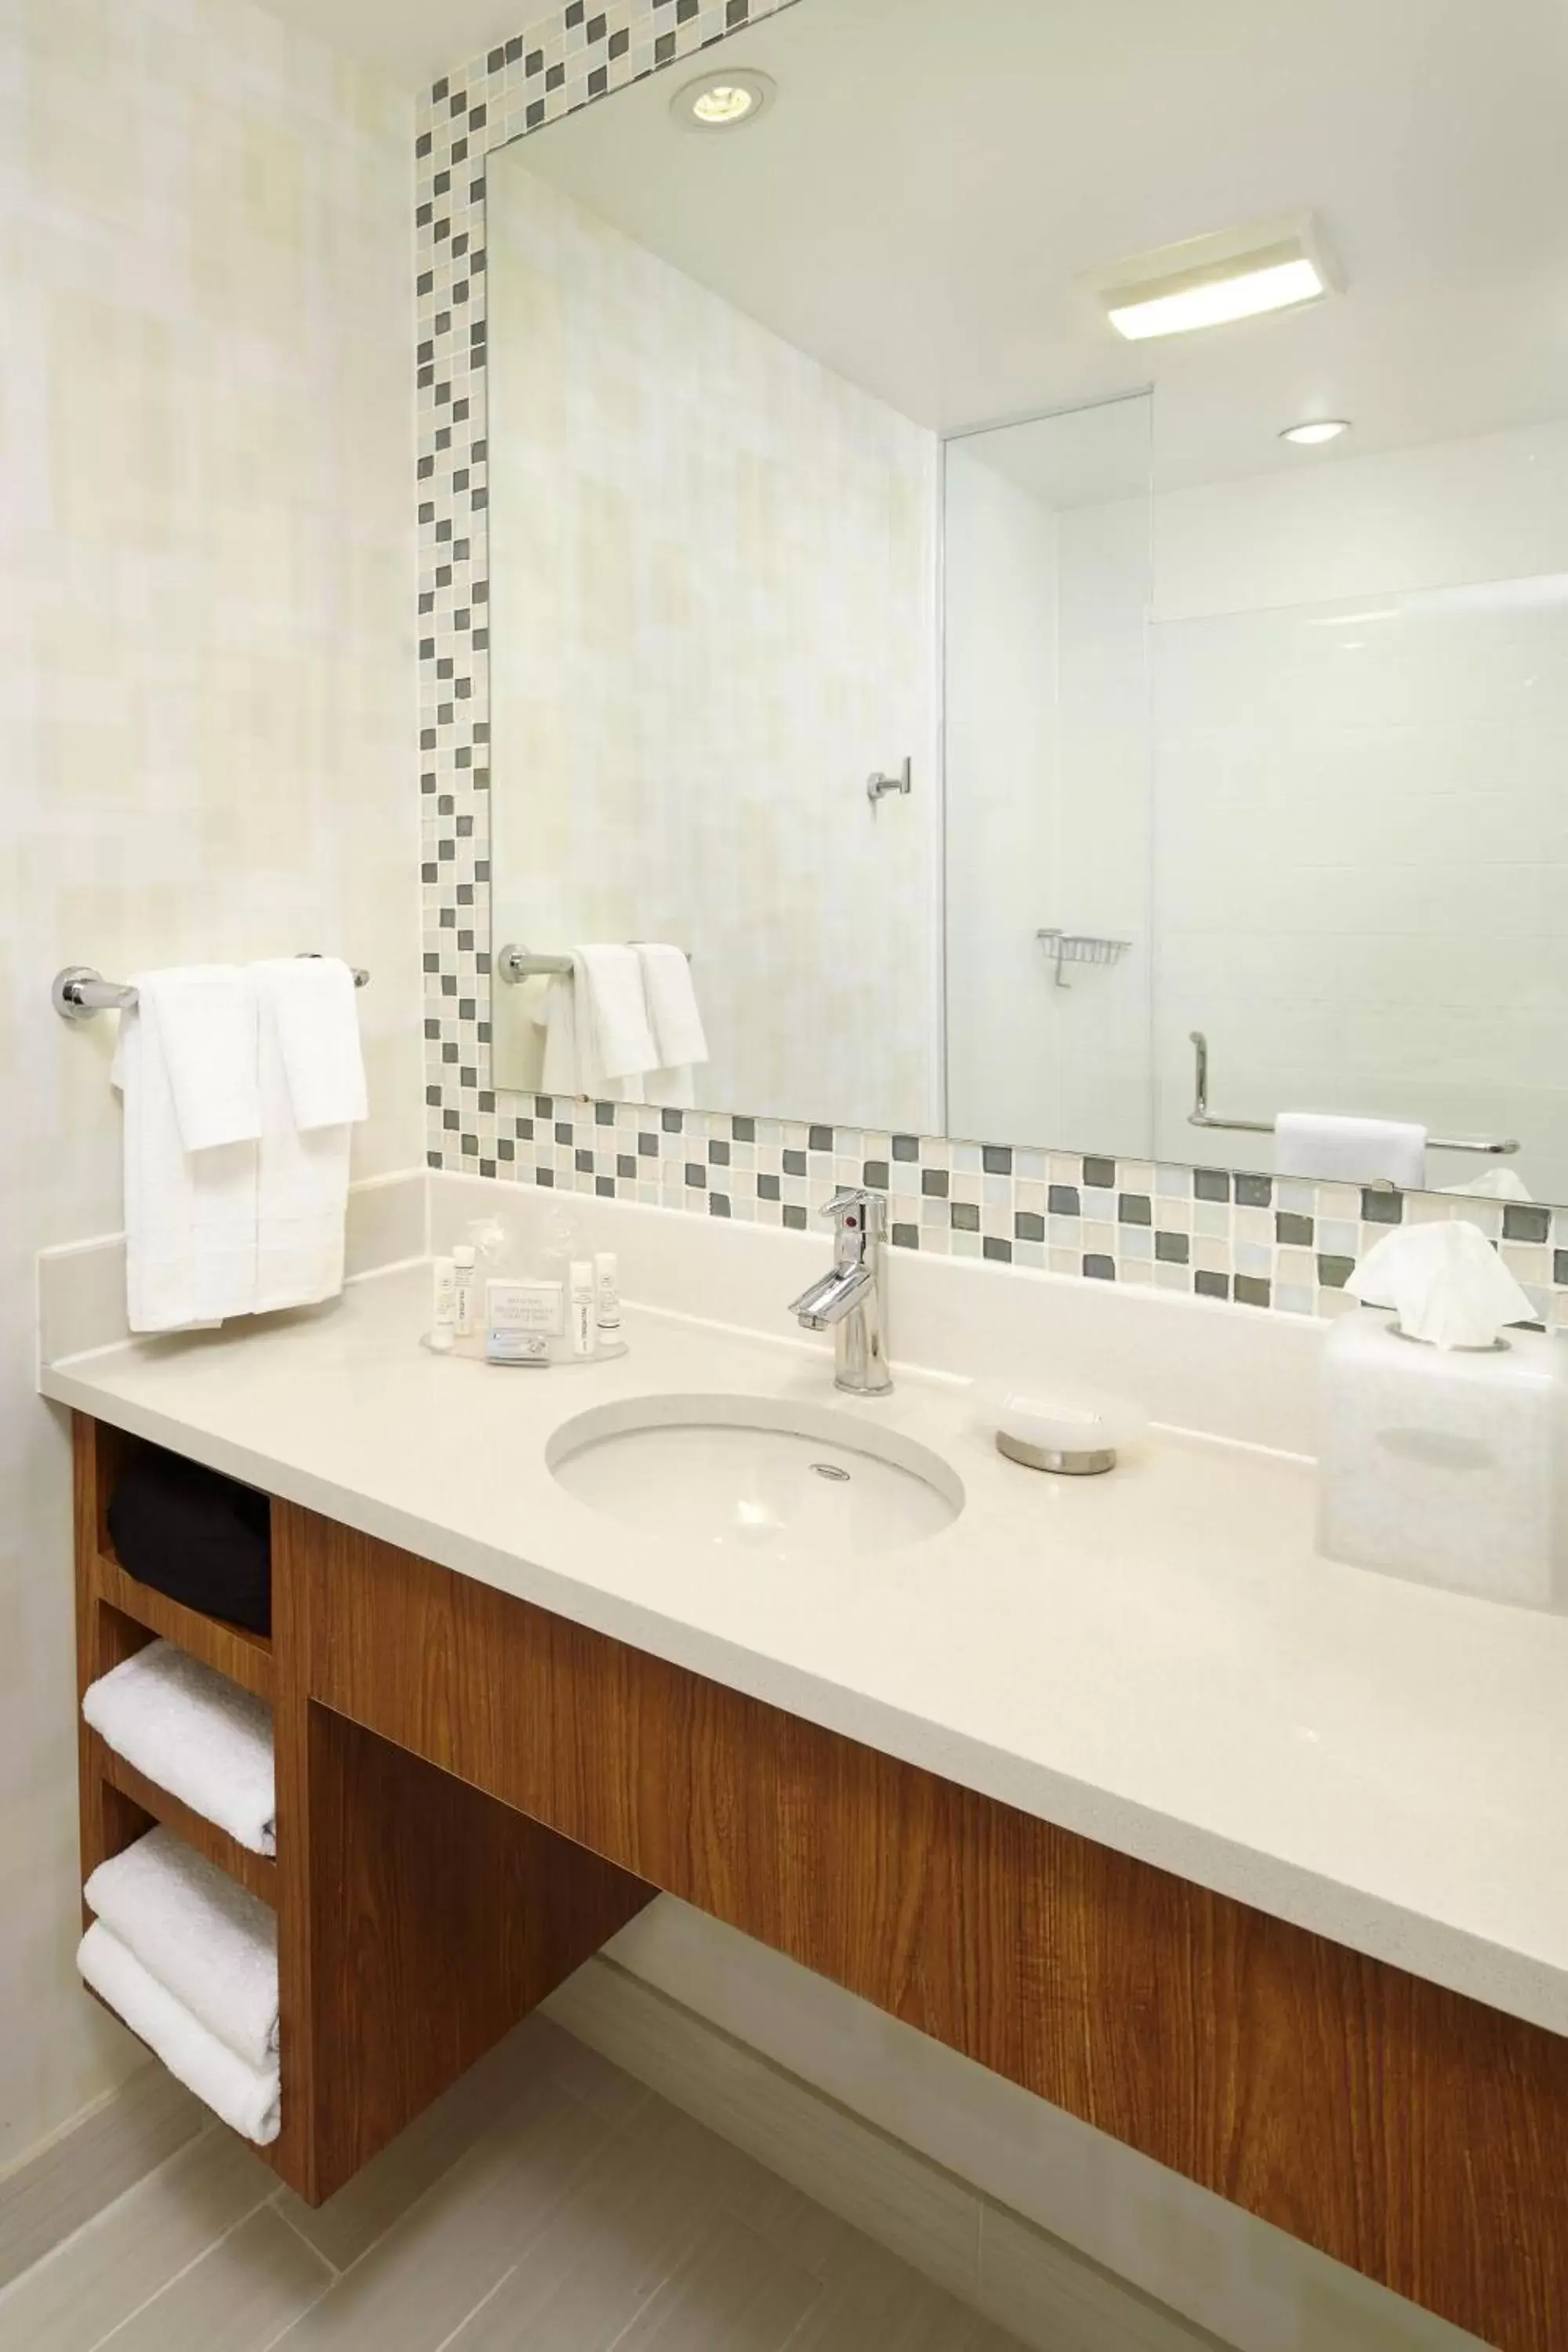 Bathroom in SpringHill Suites Houston Intercontinental Airport